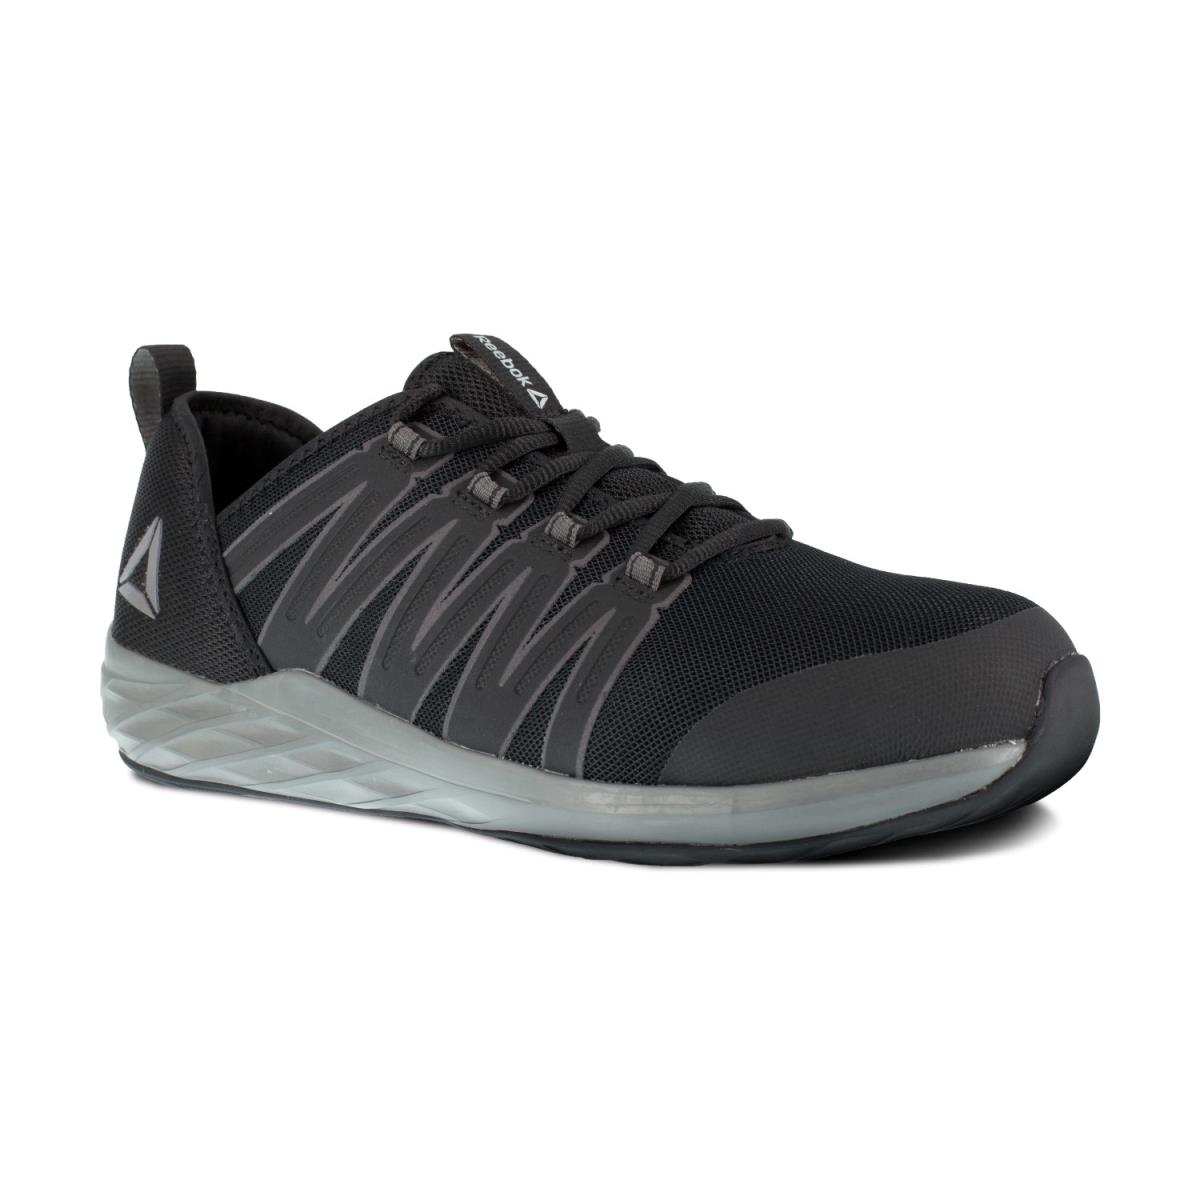 Reebok Work Men`s Astroride Steel Toe Athletic Shoe - All Colors - All Sizes Black and Dark Grey